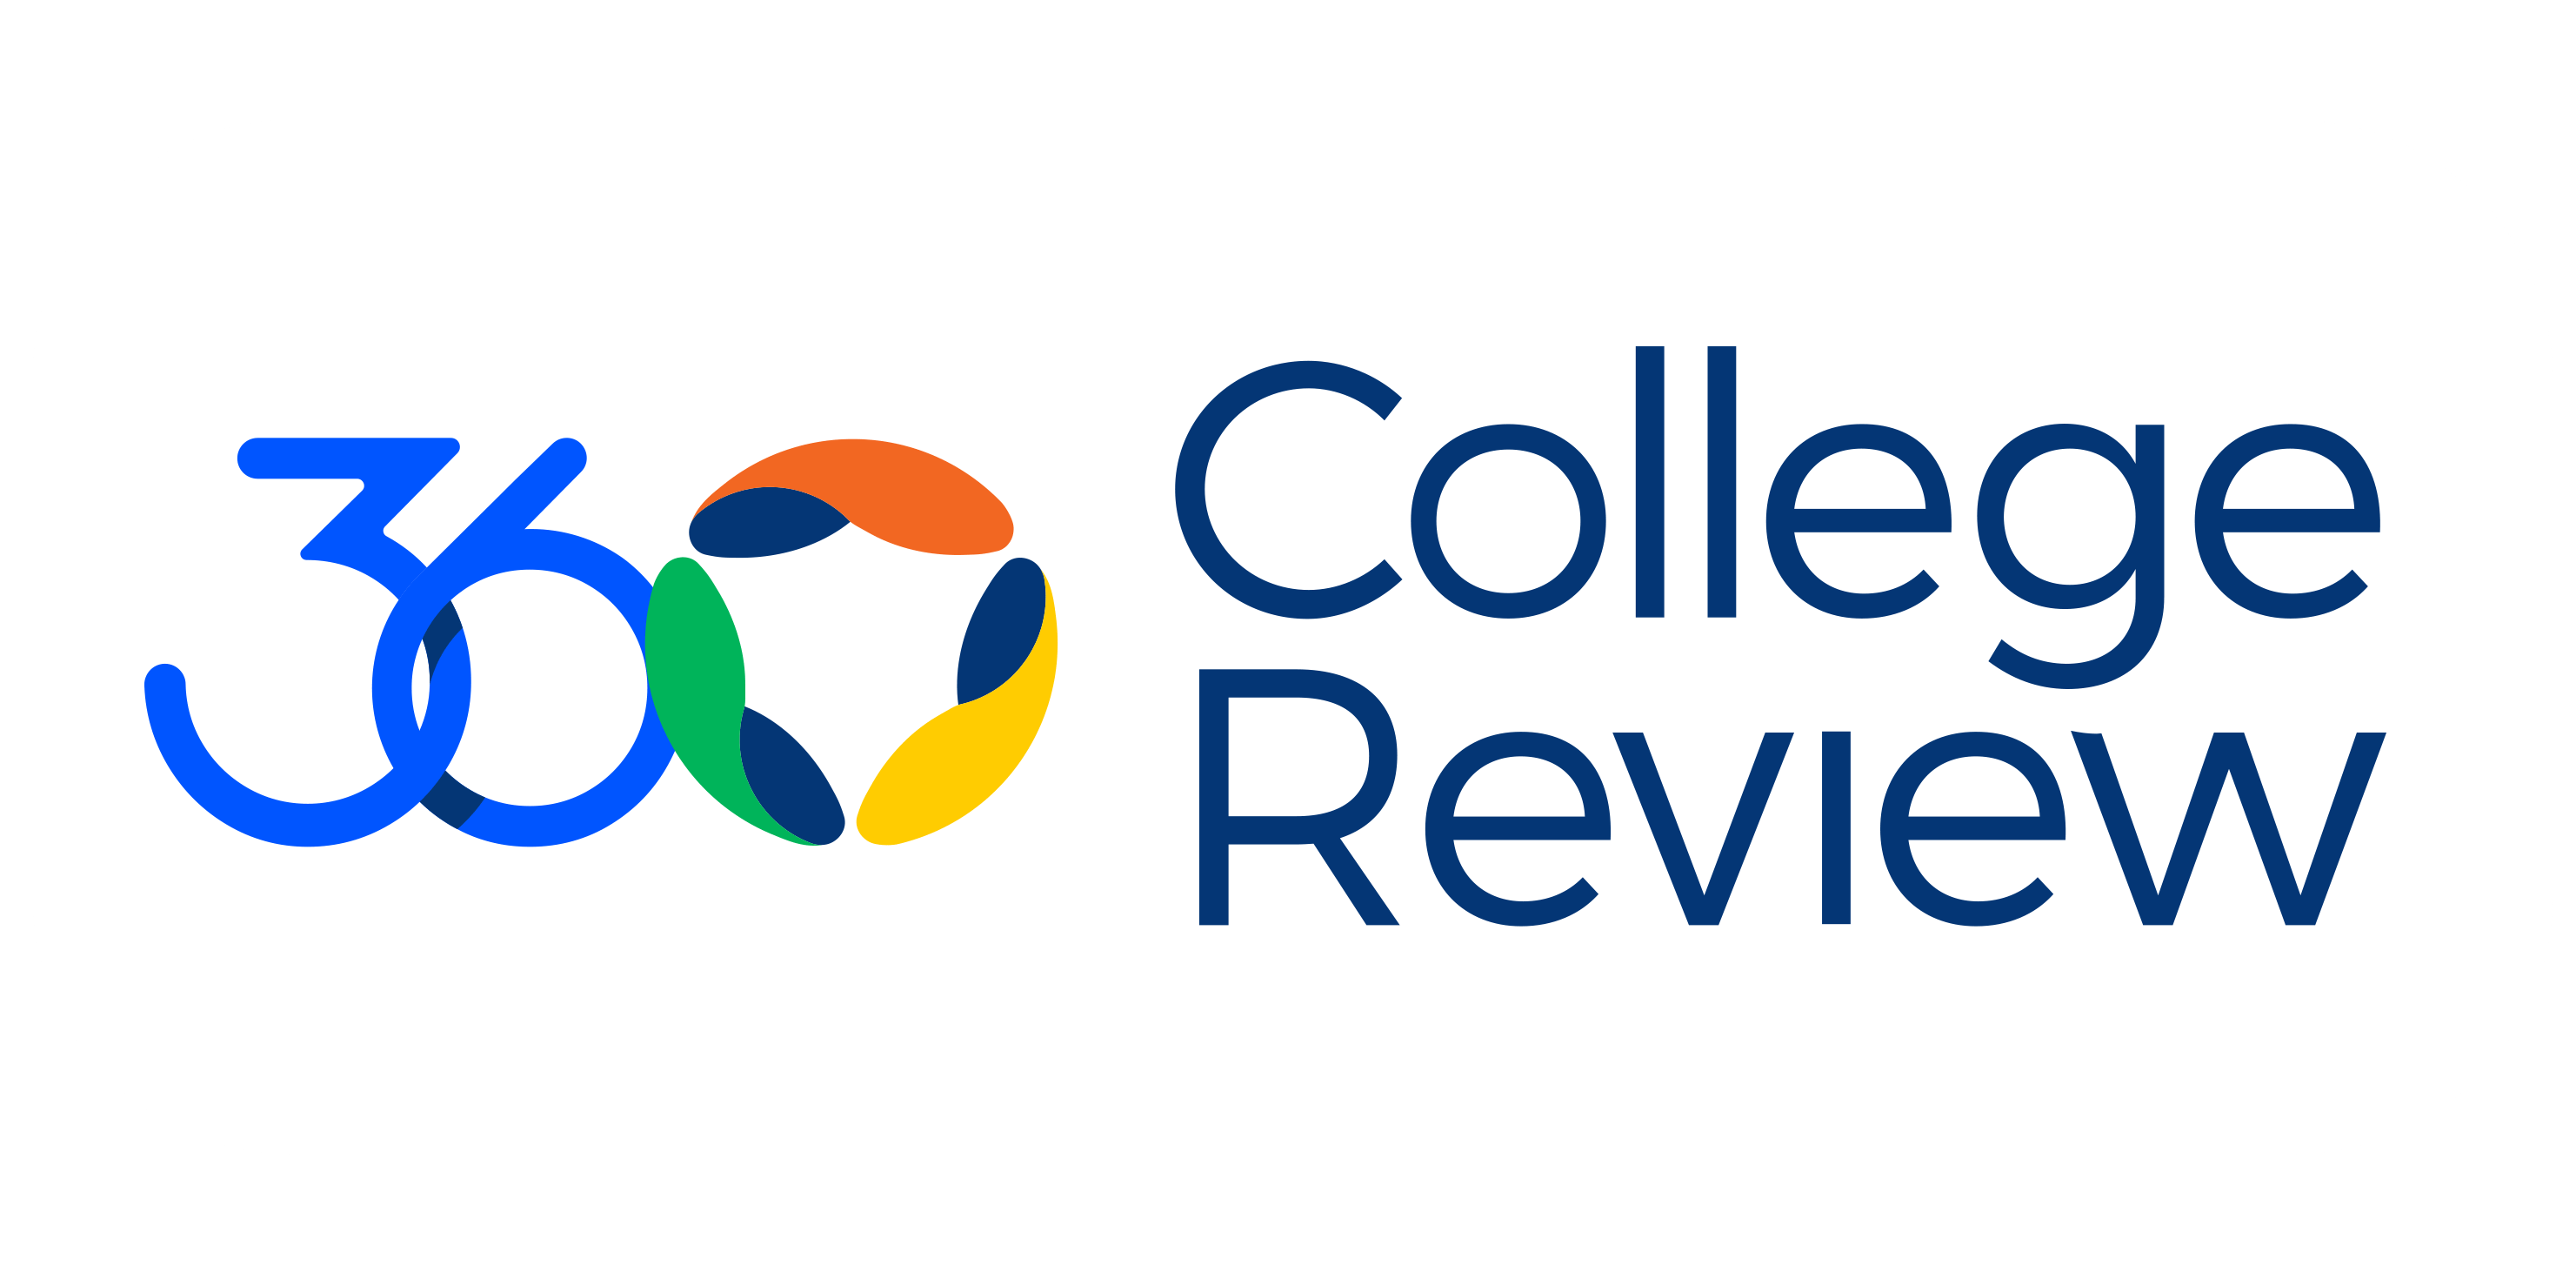 360 College Review Logo